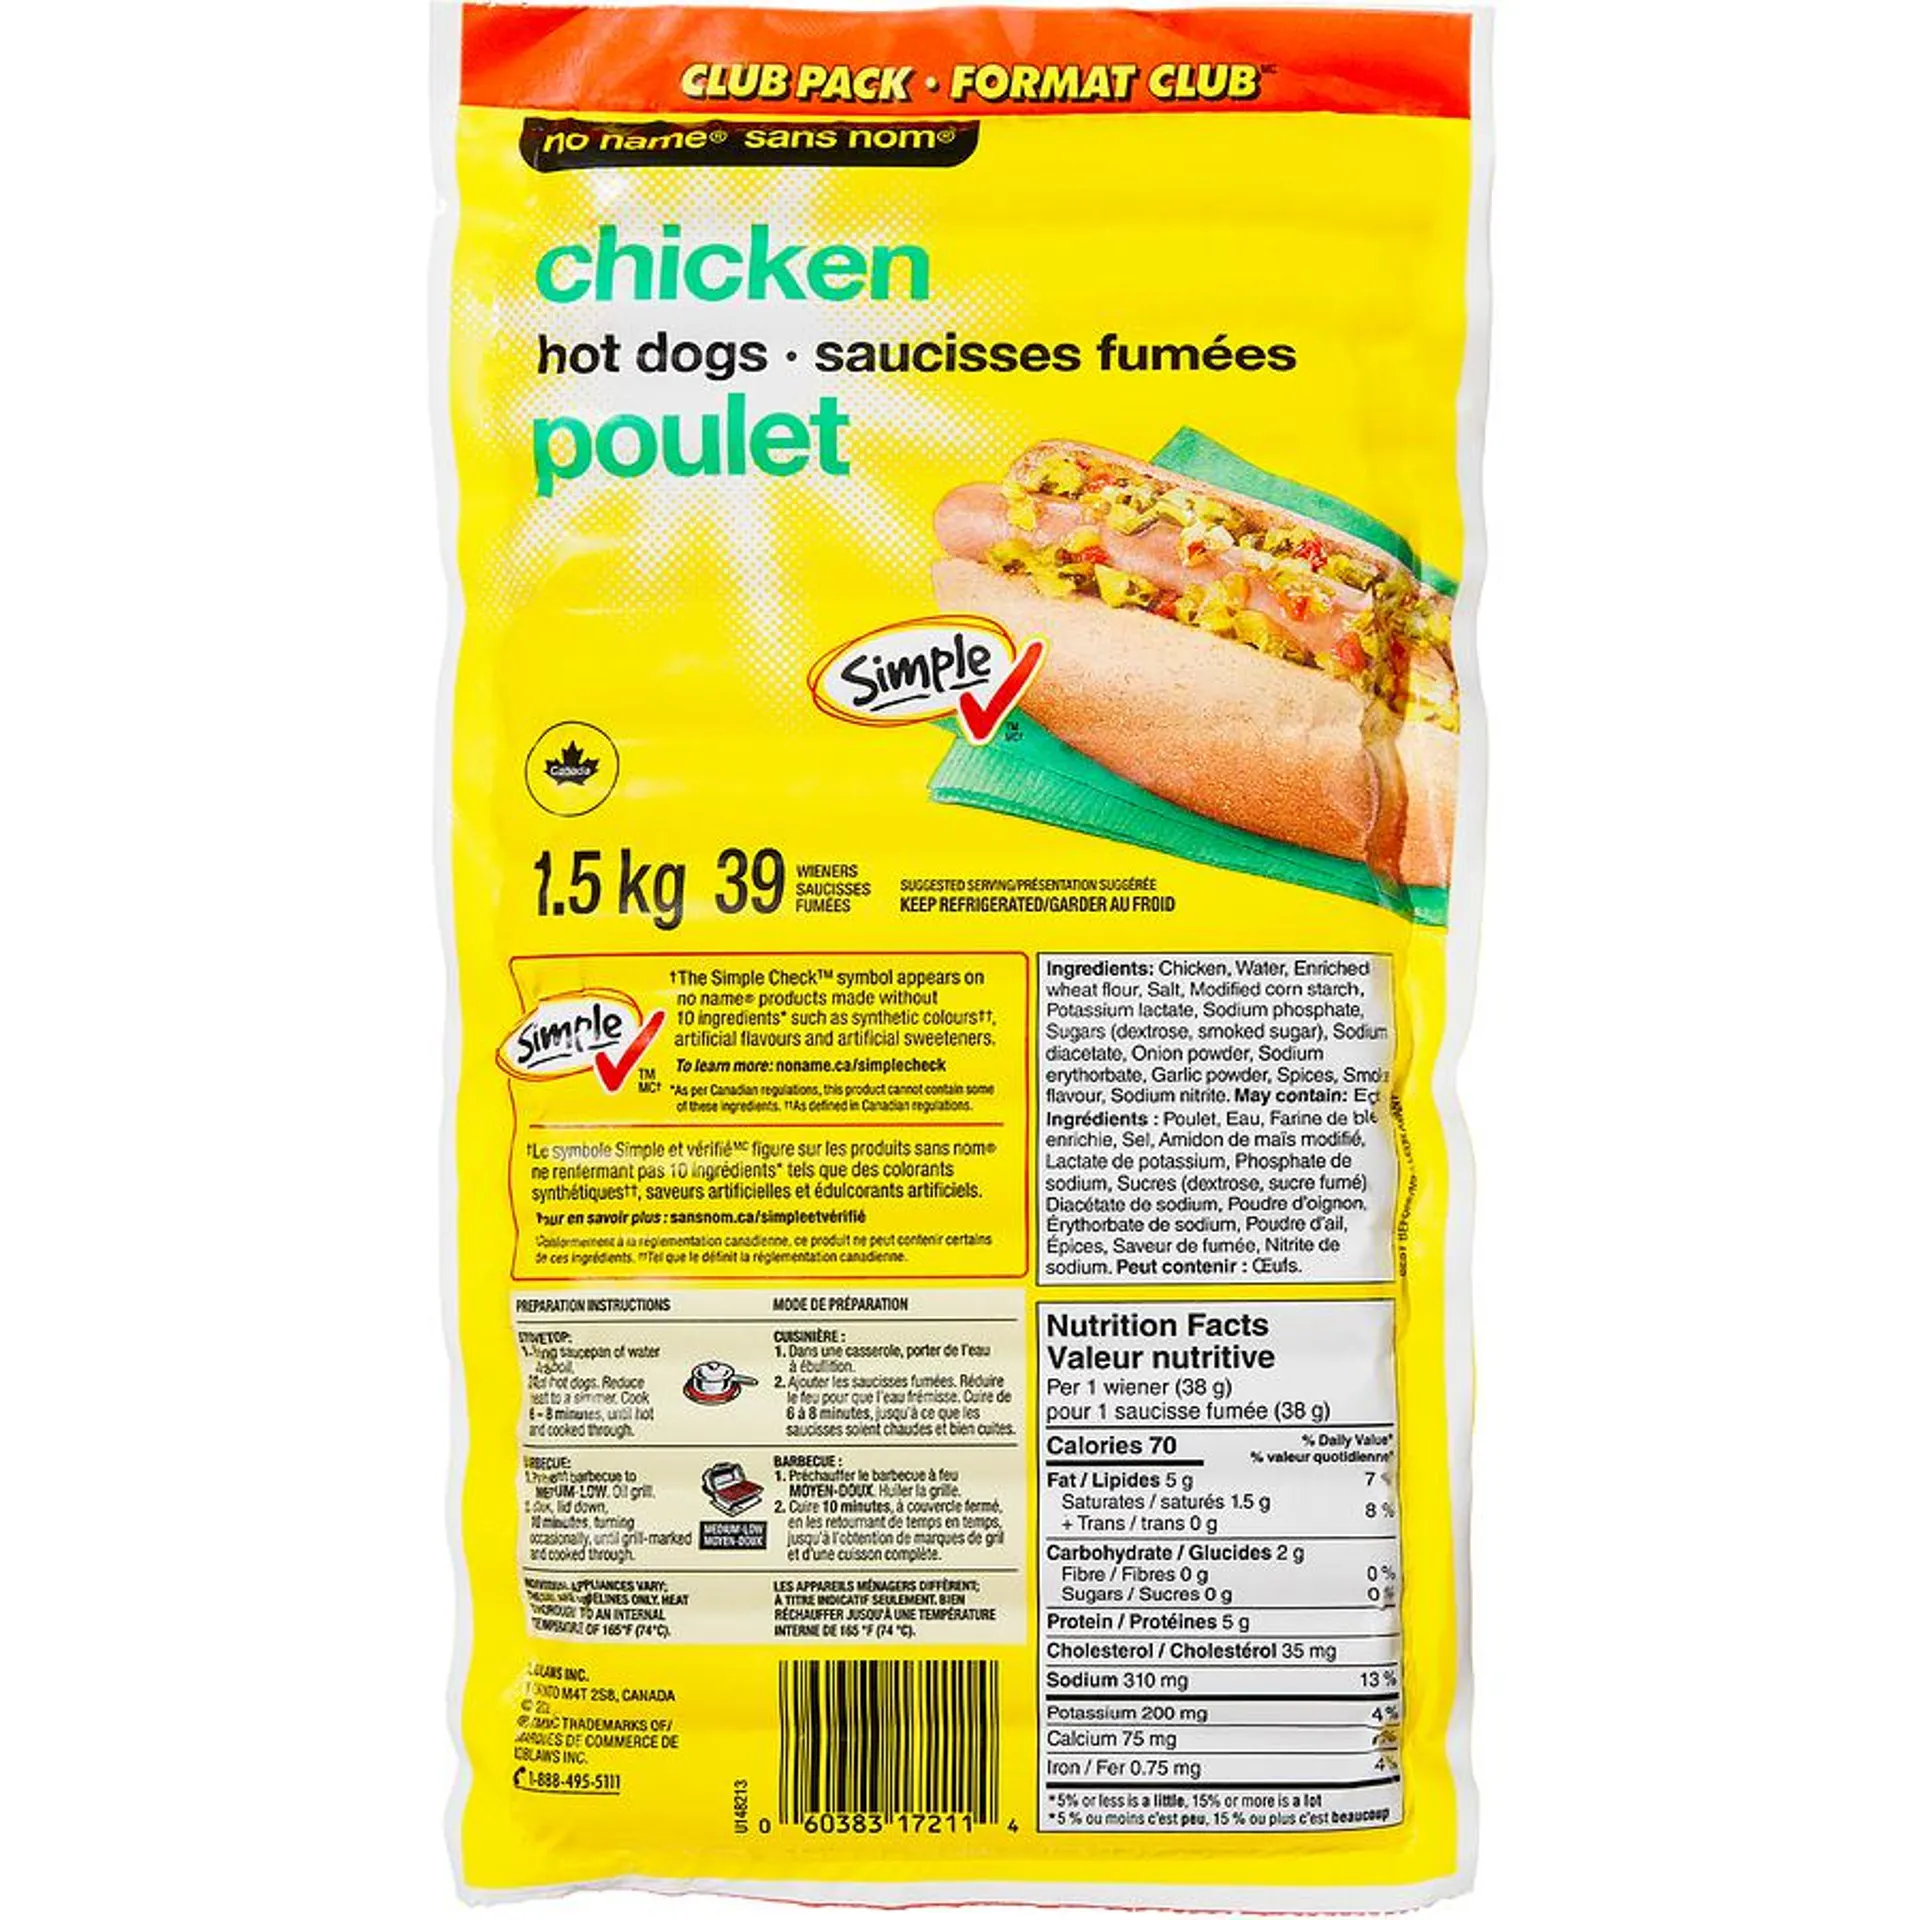 Hot Dogs Chicken Club Pack